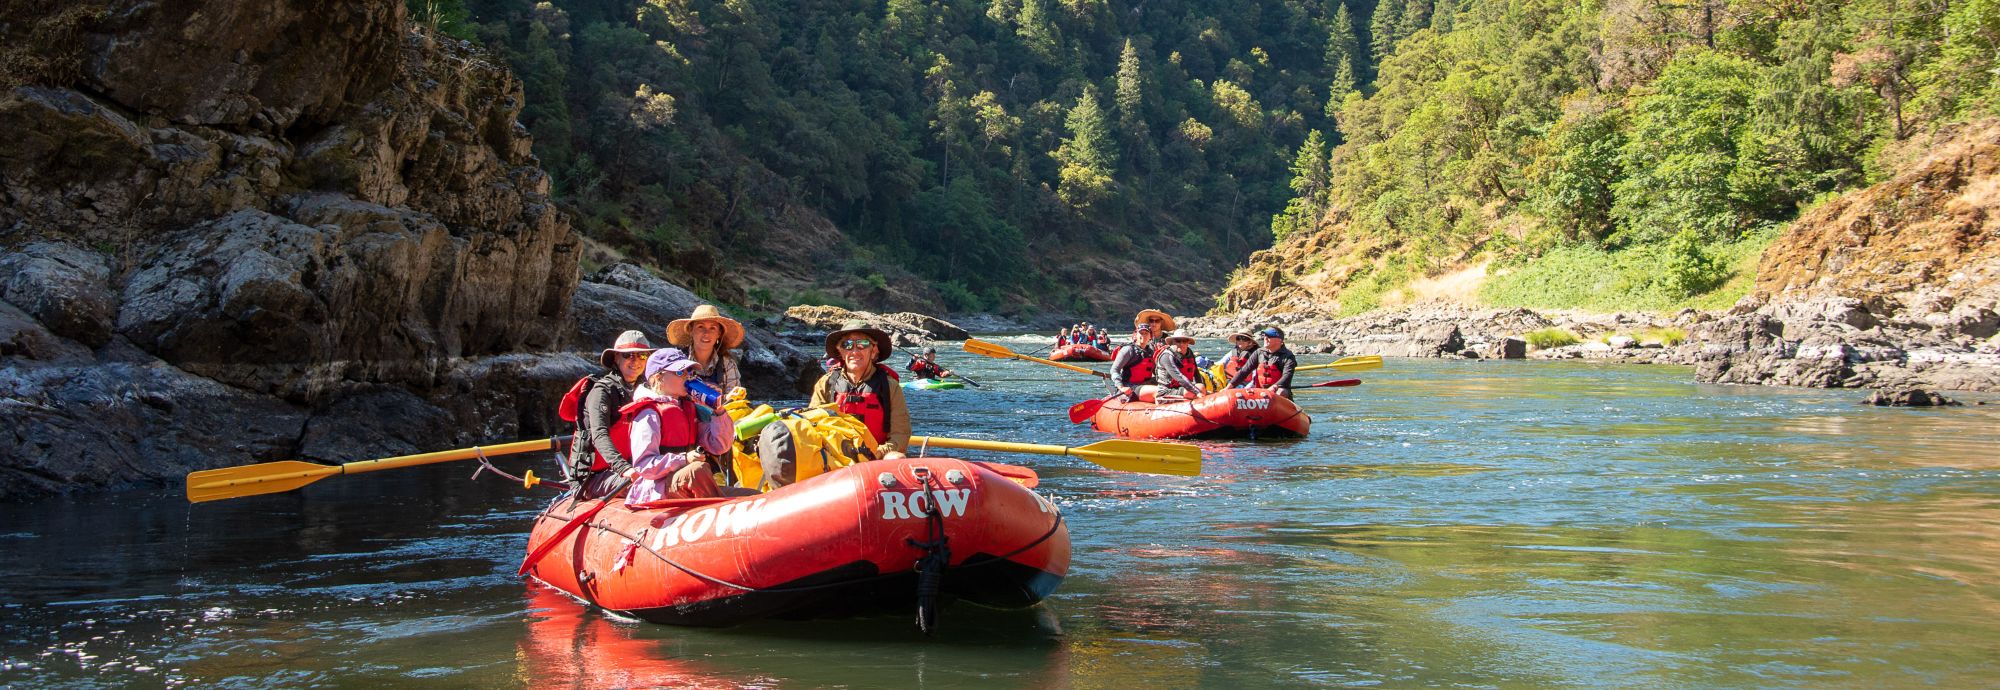 people on rafting trip floating down a river